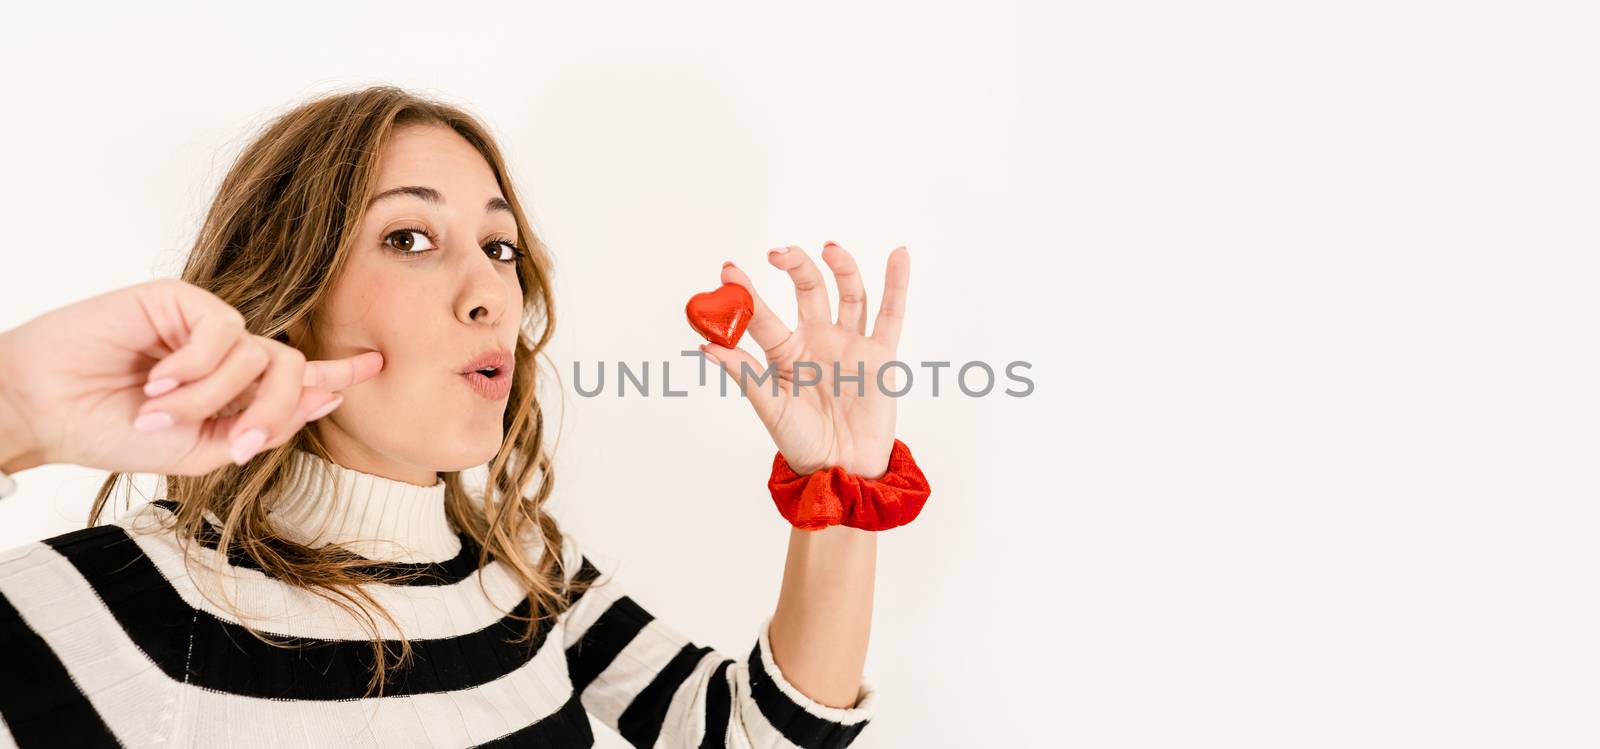 Head and shoulders close up of a blonde cute excited woman looking at the camera holding a heart-shaped chocolate between your fingers and gluttony expression - Chocolate: symbol of sin and temptation by robbyfontanesi